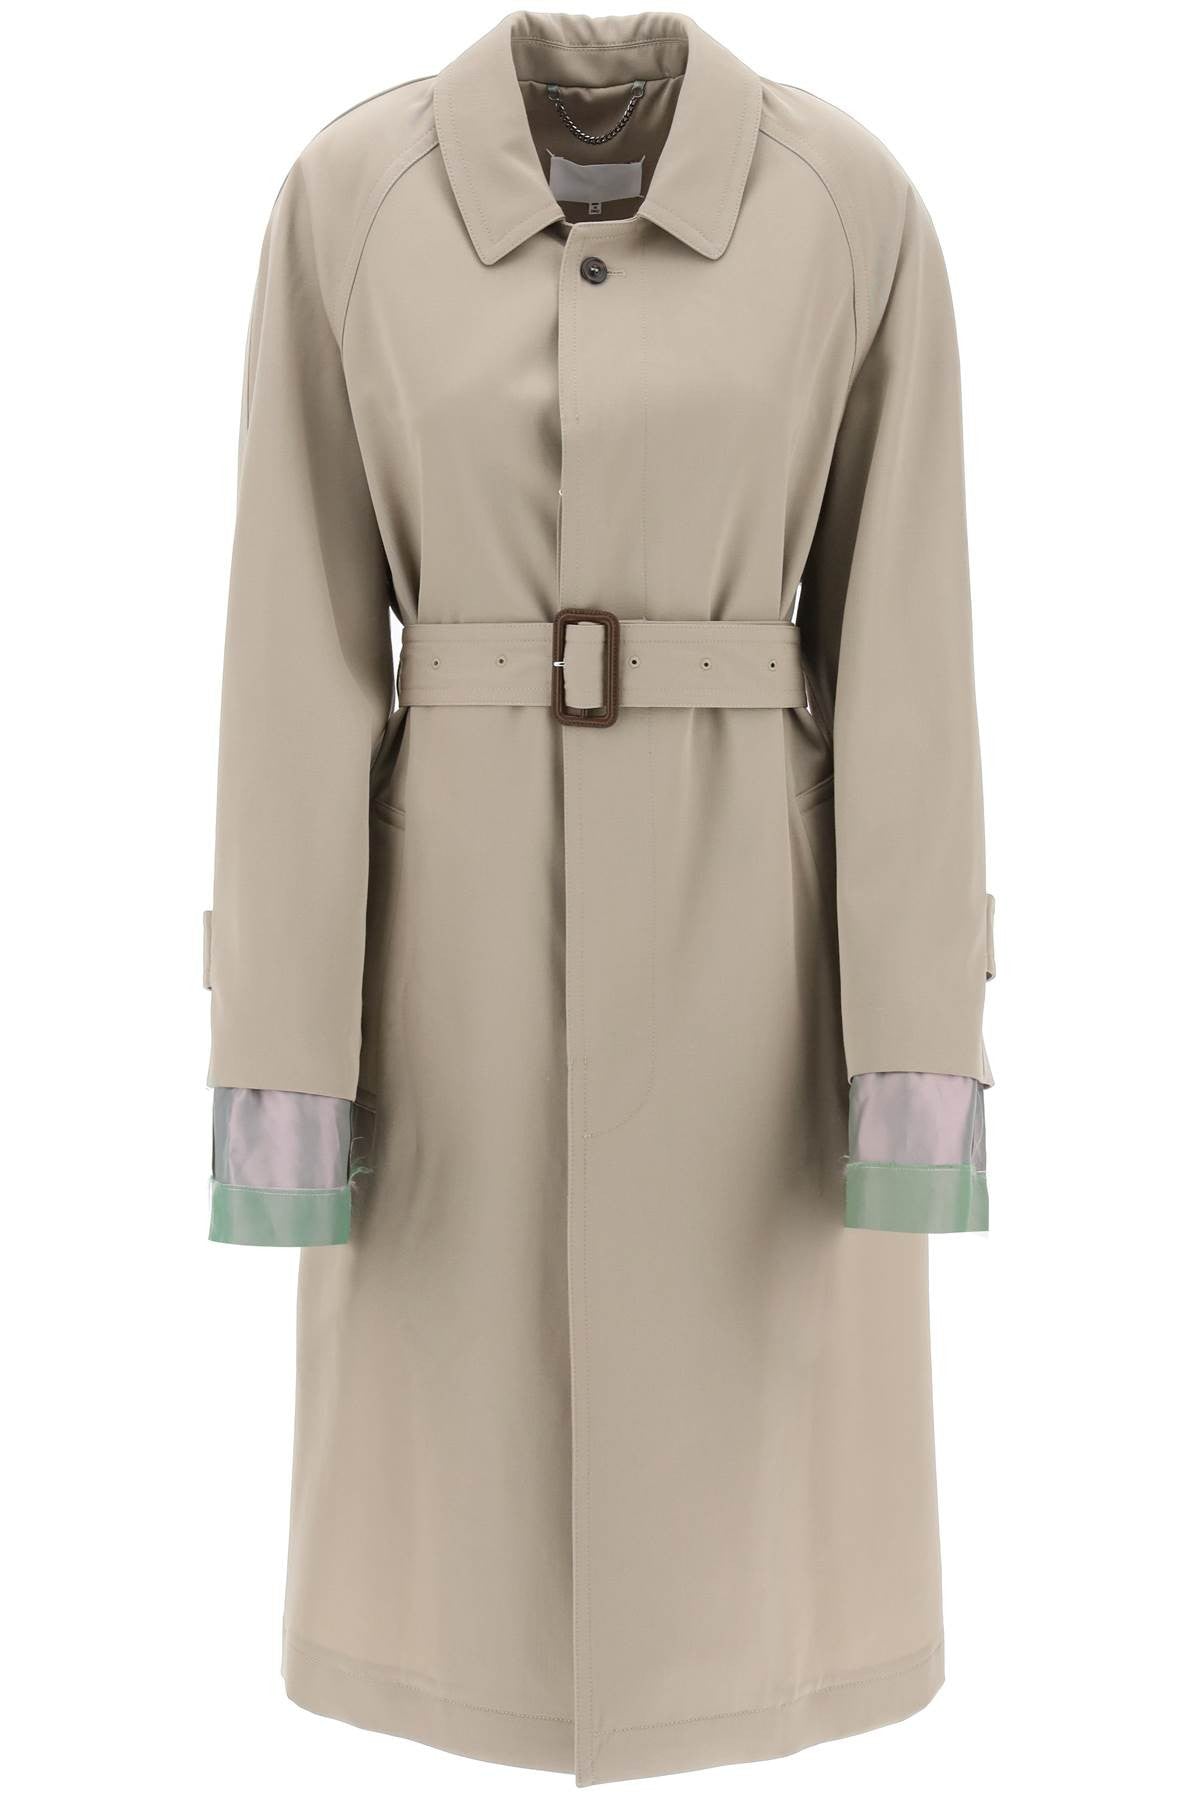 "trench coat with discreet